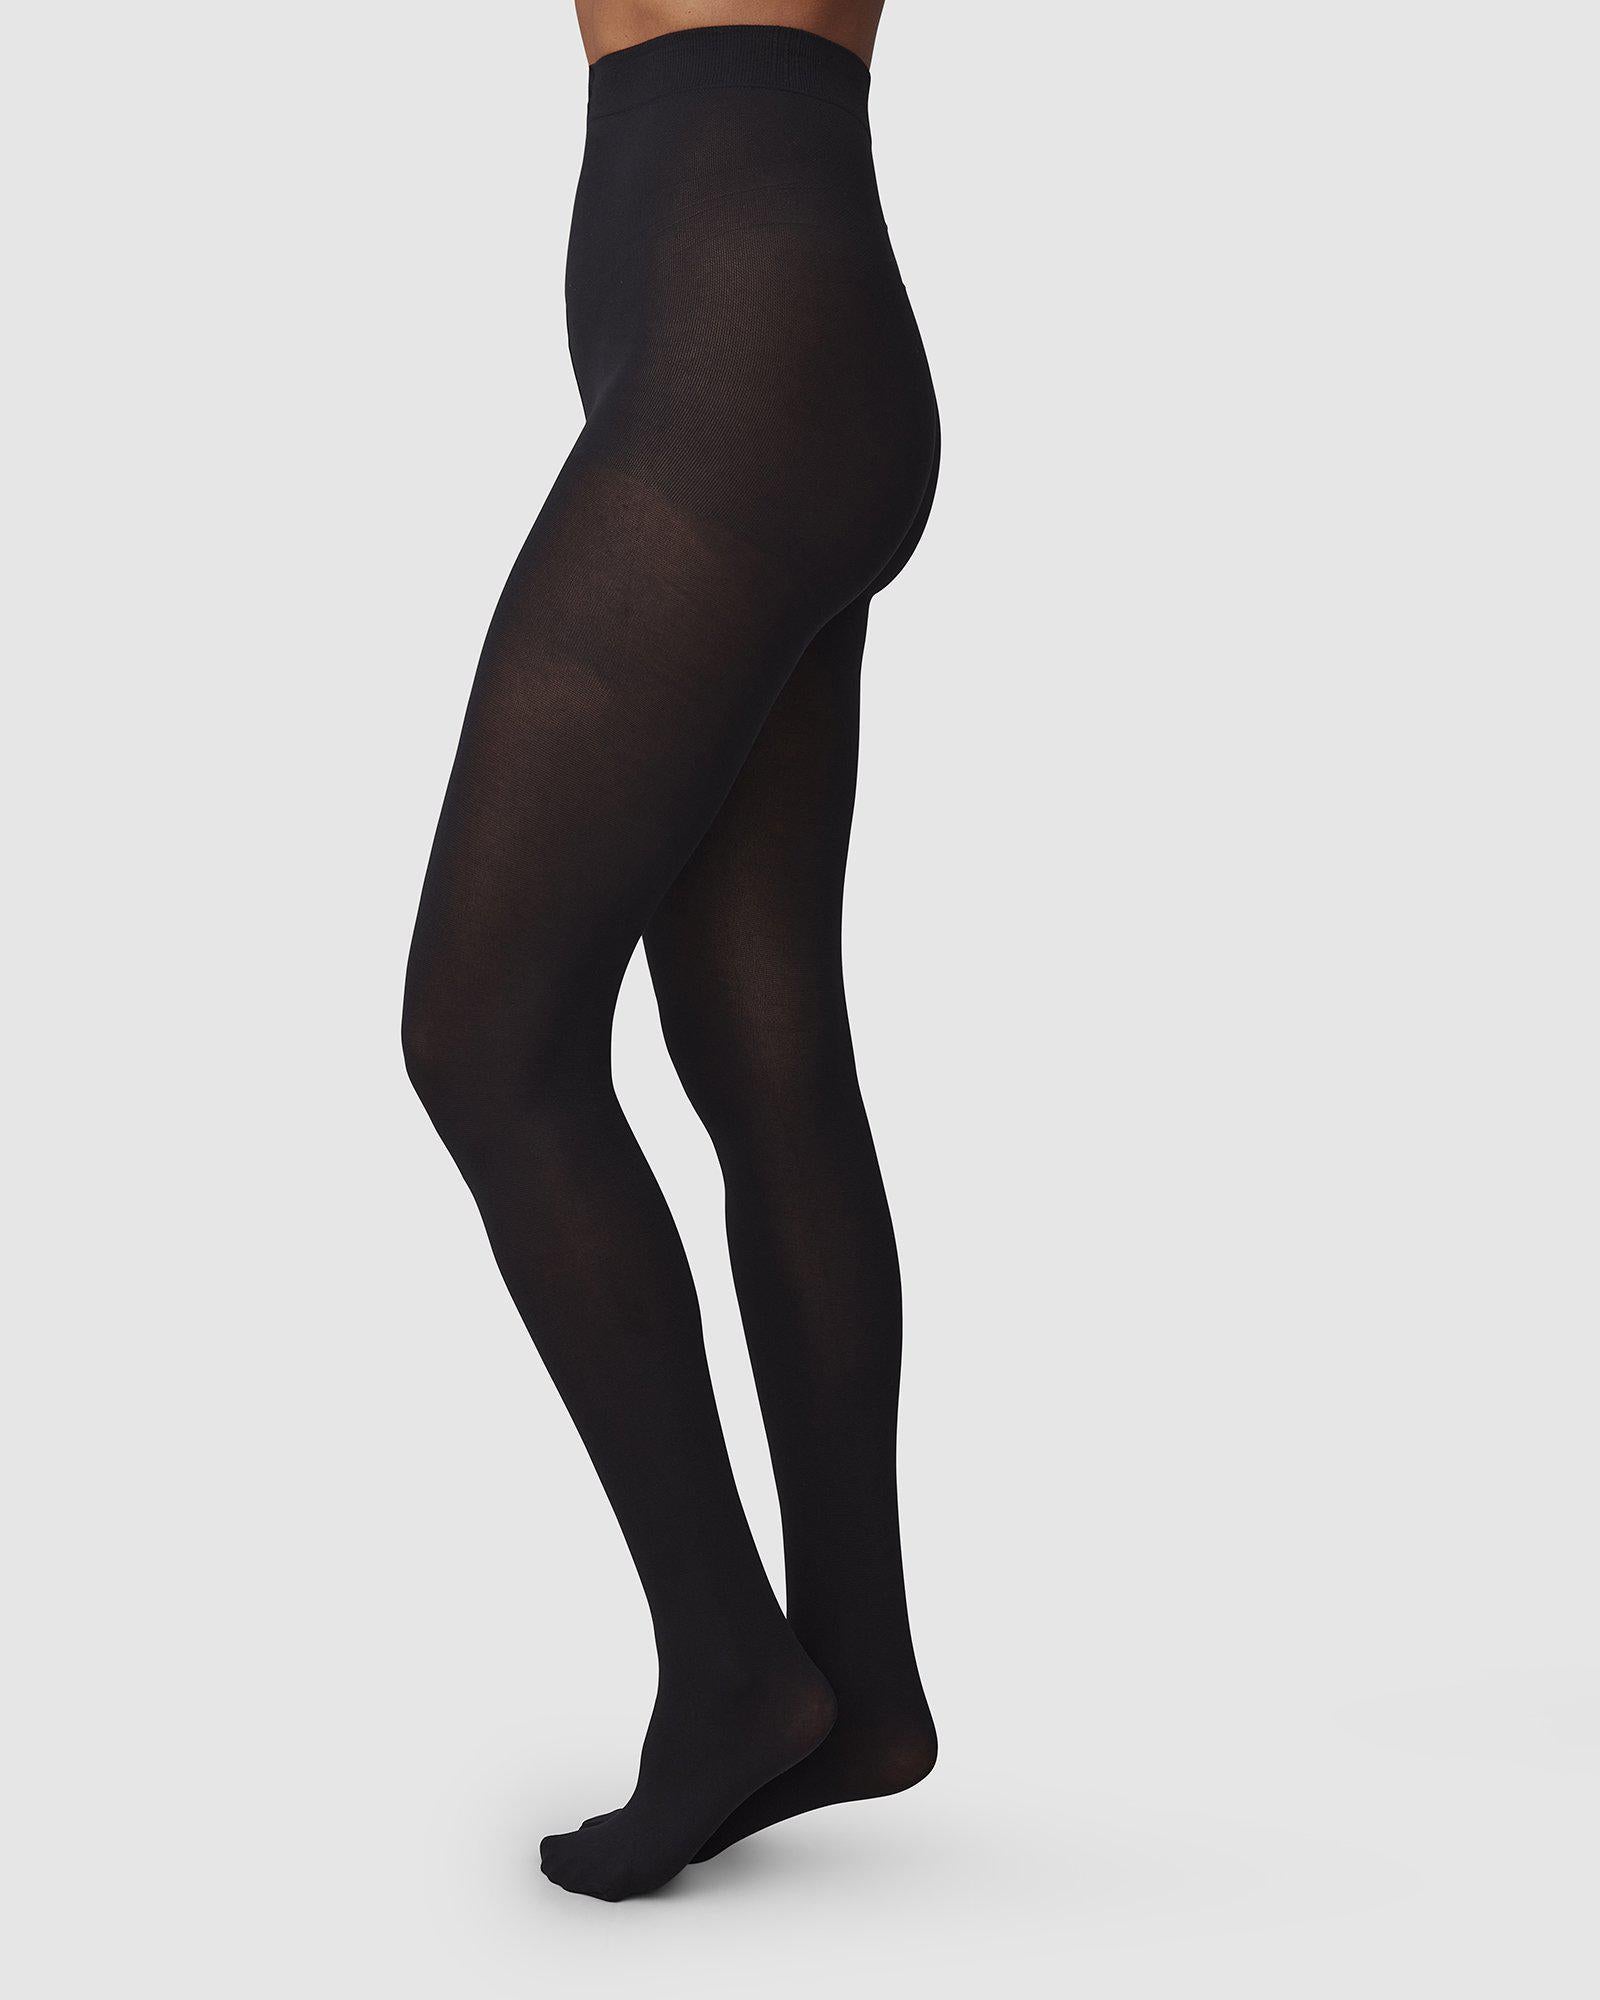 Cotton Tights and pantyhose for Women